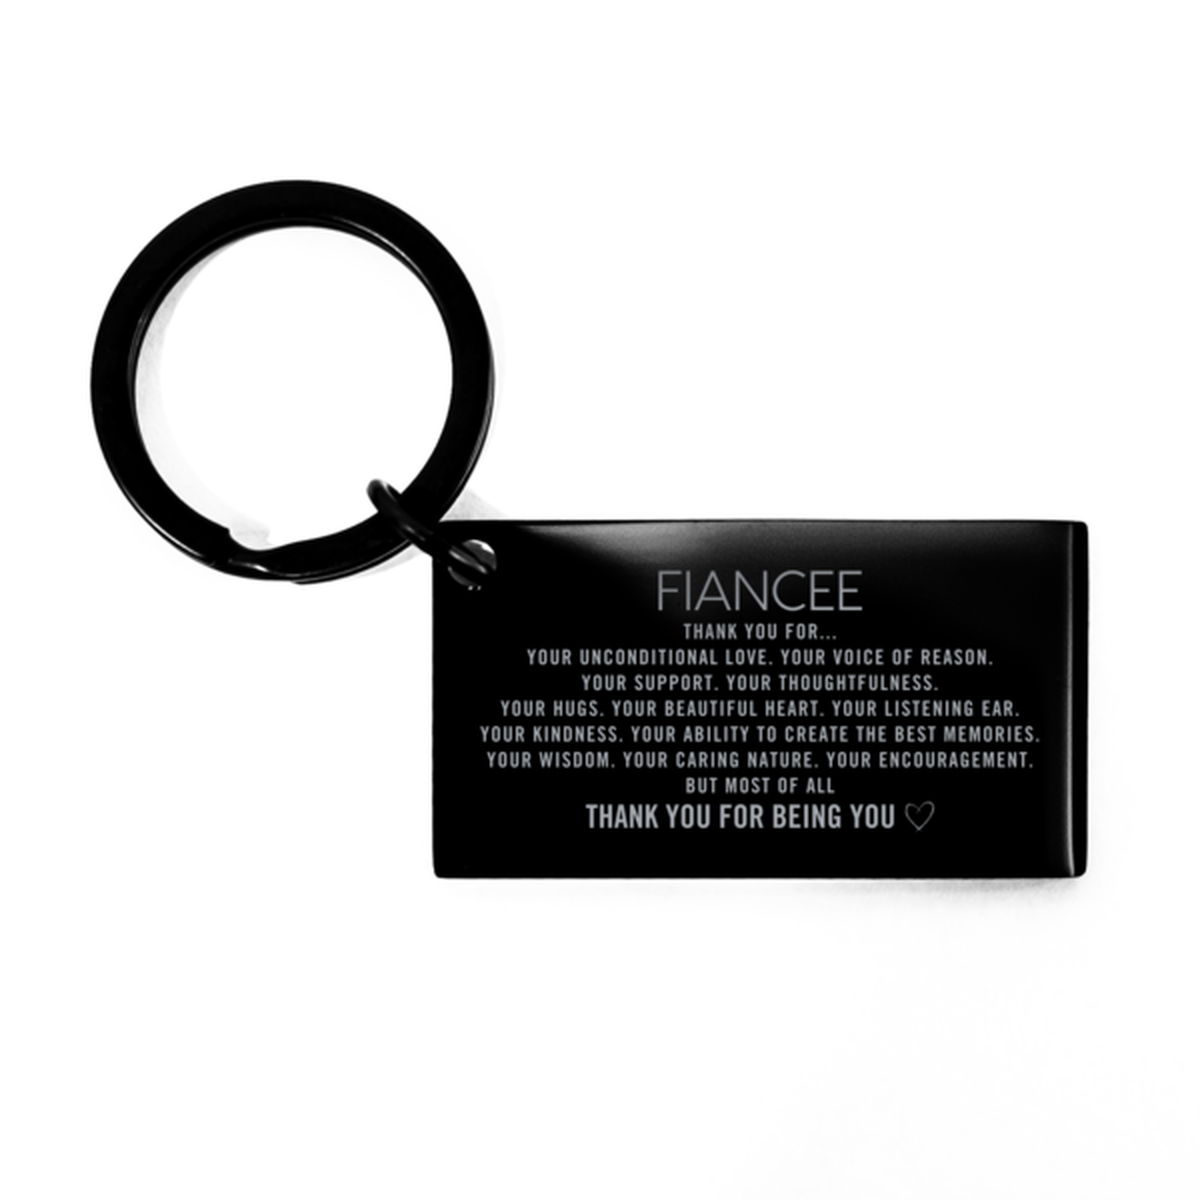 Fiancee Keychain Custom, Engraved Gifts For Fiancee Christmas Graduation Birthday Gifts for Men Women Fiancee Thank you for Your unconditional love